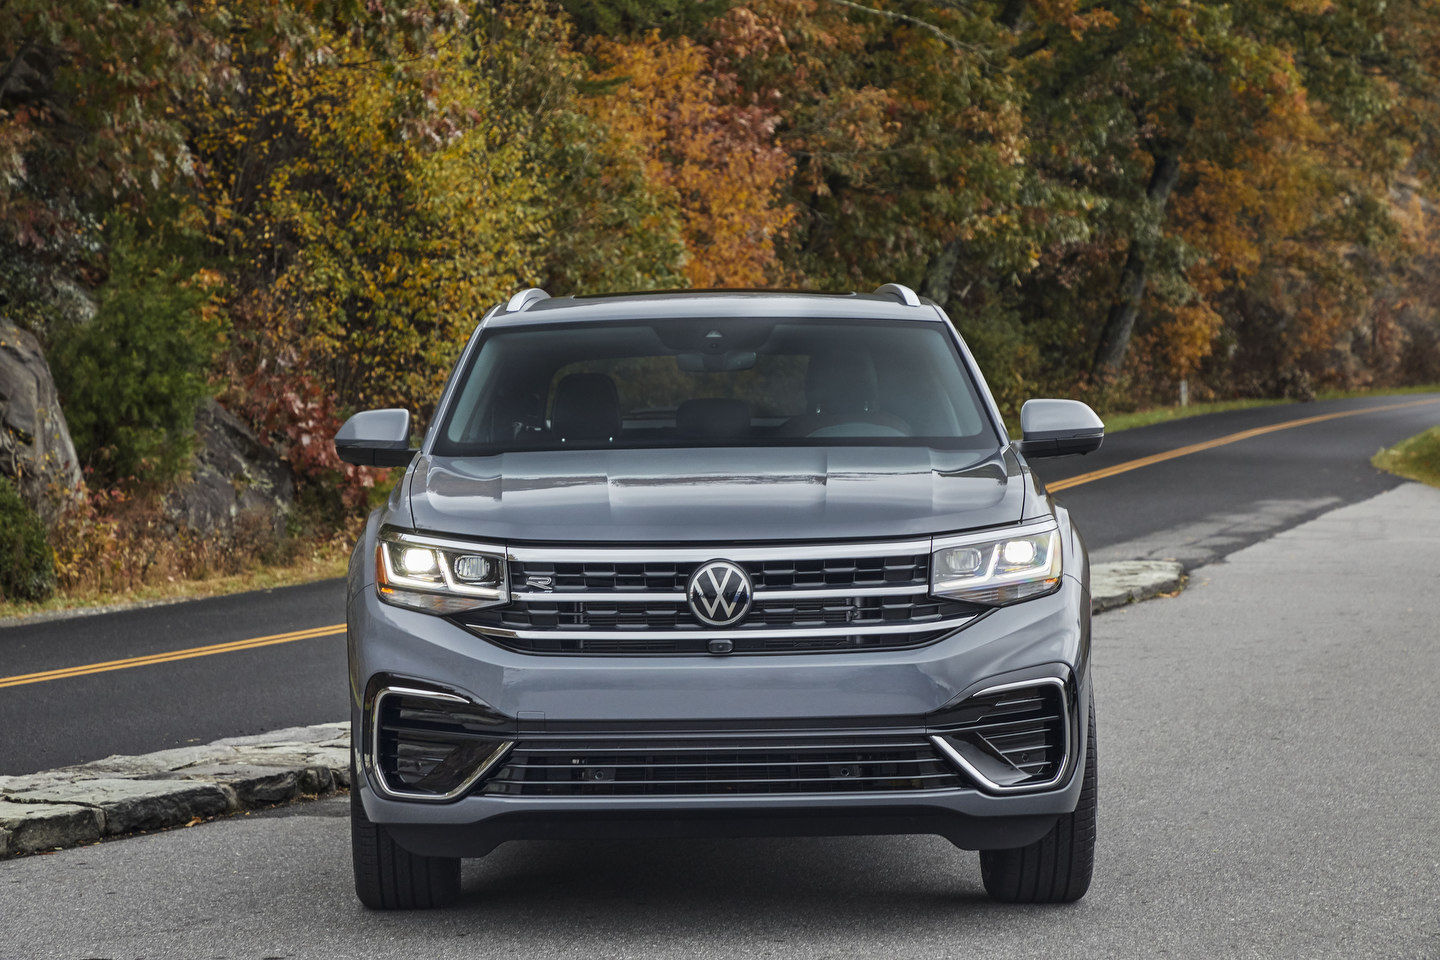 Here are Some of the Differences Between the 2022 Volkswagen Atlas and the 2022 Volkswagen Atlas Cross Sport